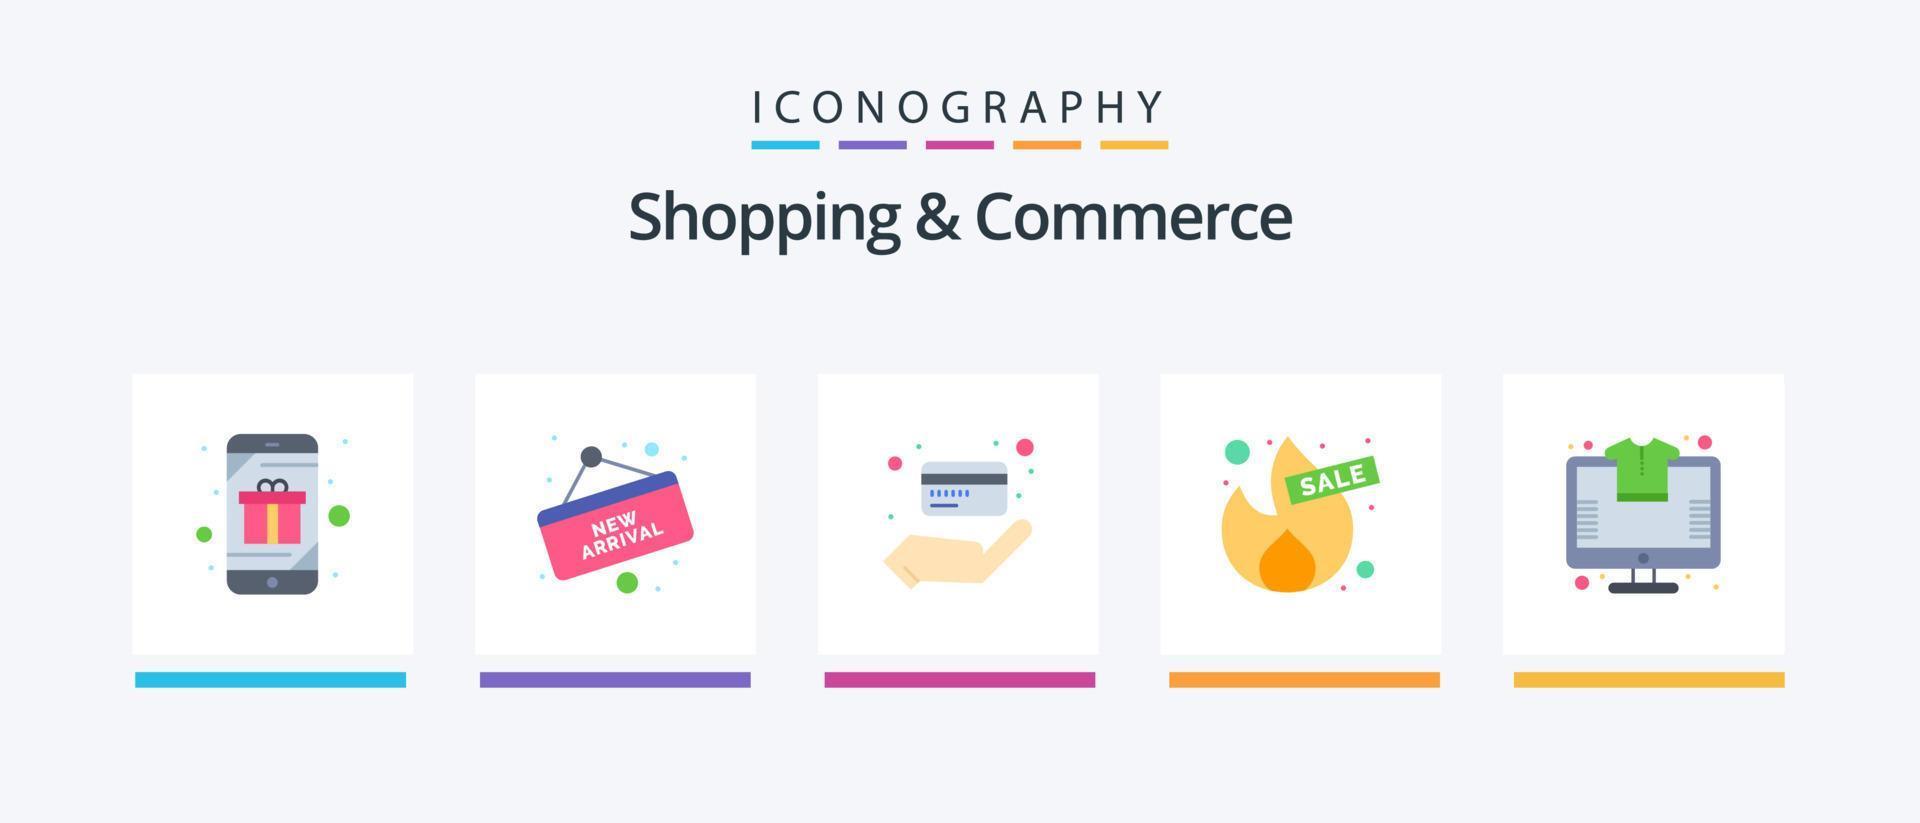 Shopping And Commerce Flat 5 Icon Pack Including online. offer. board. hot. credit card. Creative Icons Design vector